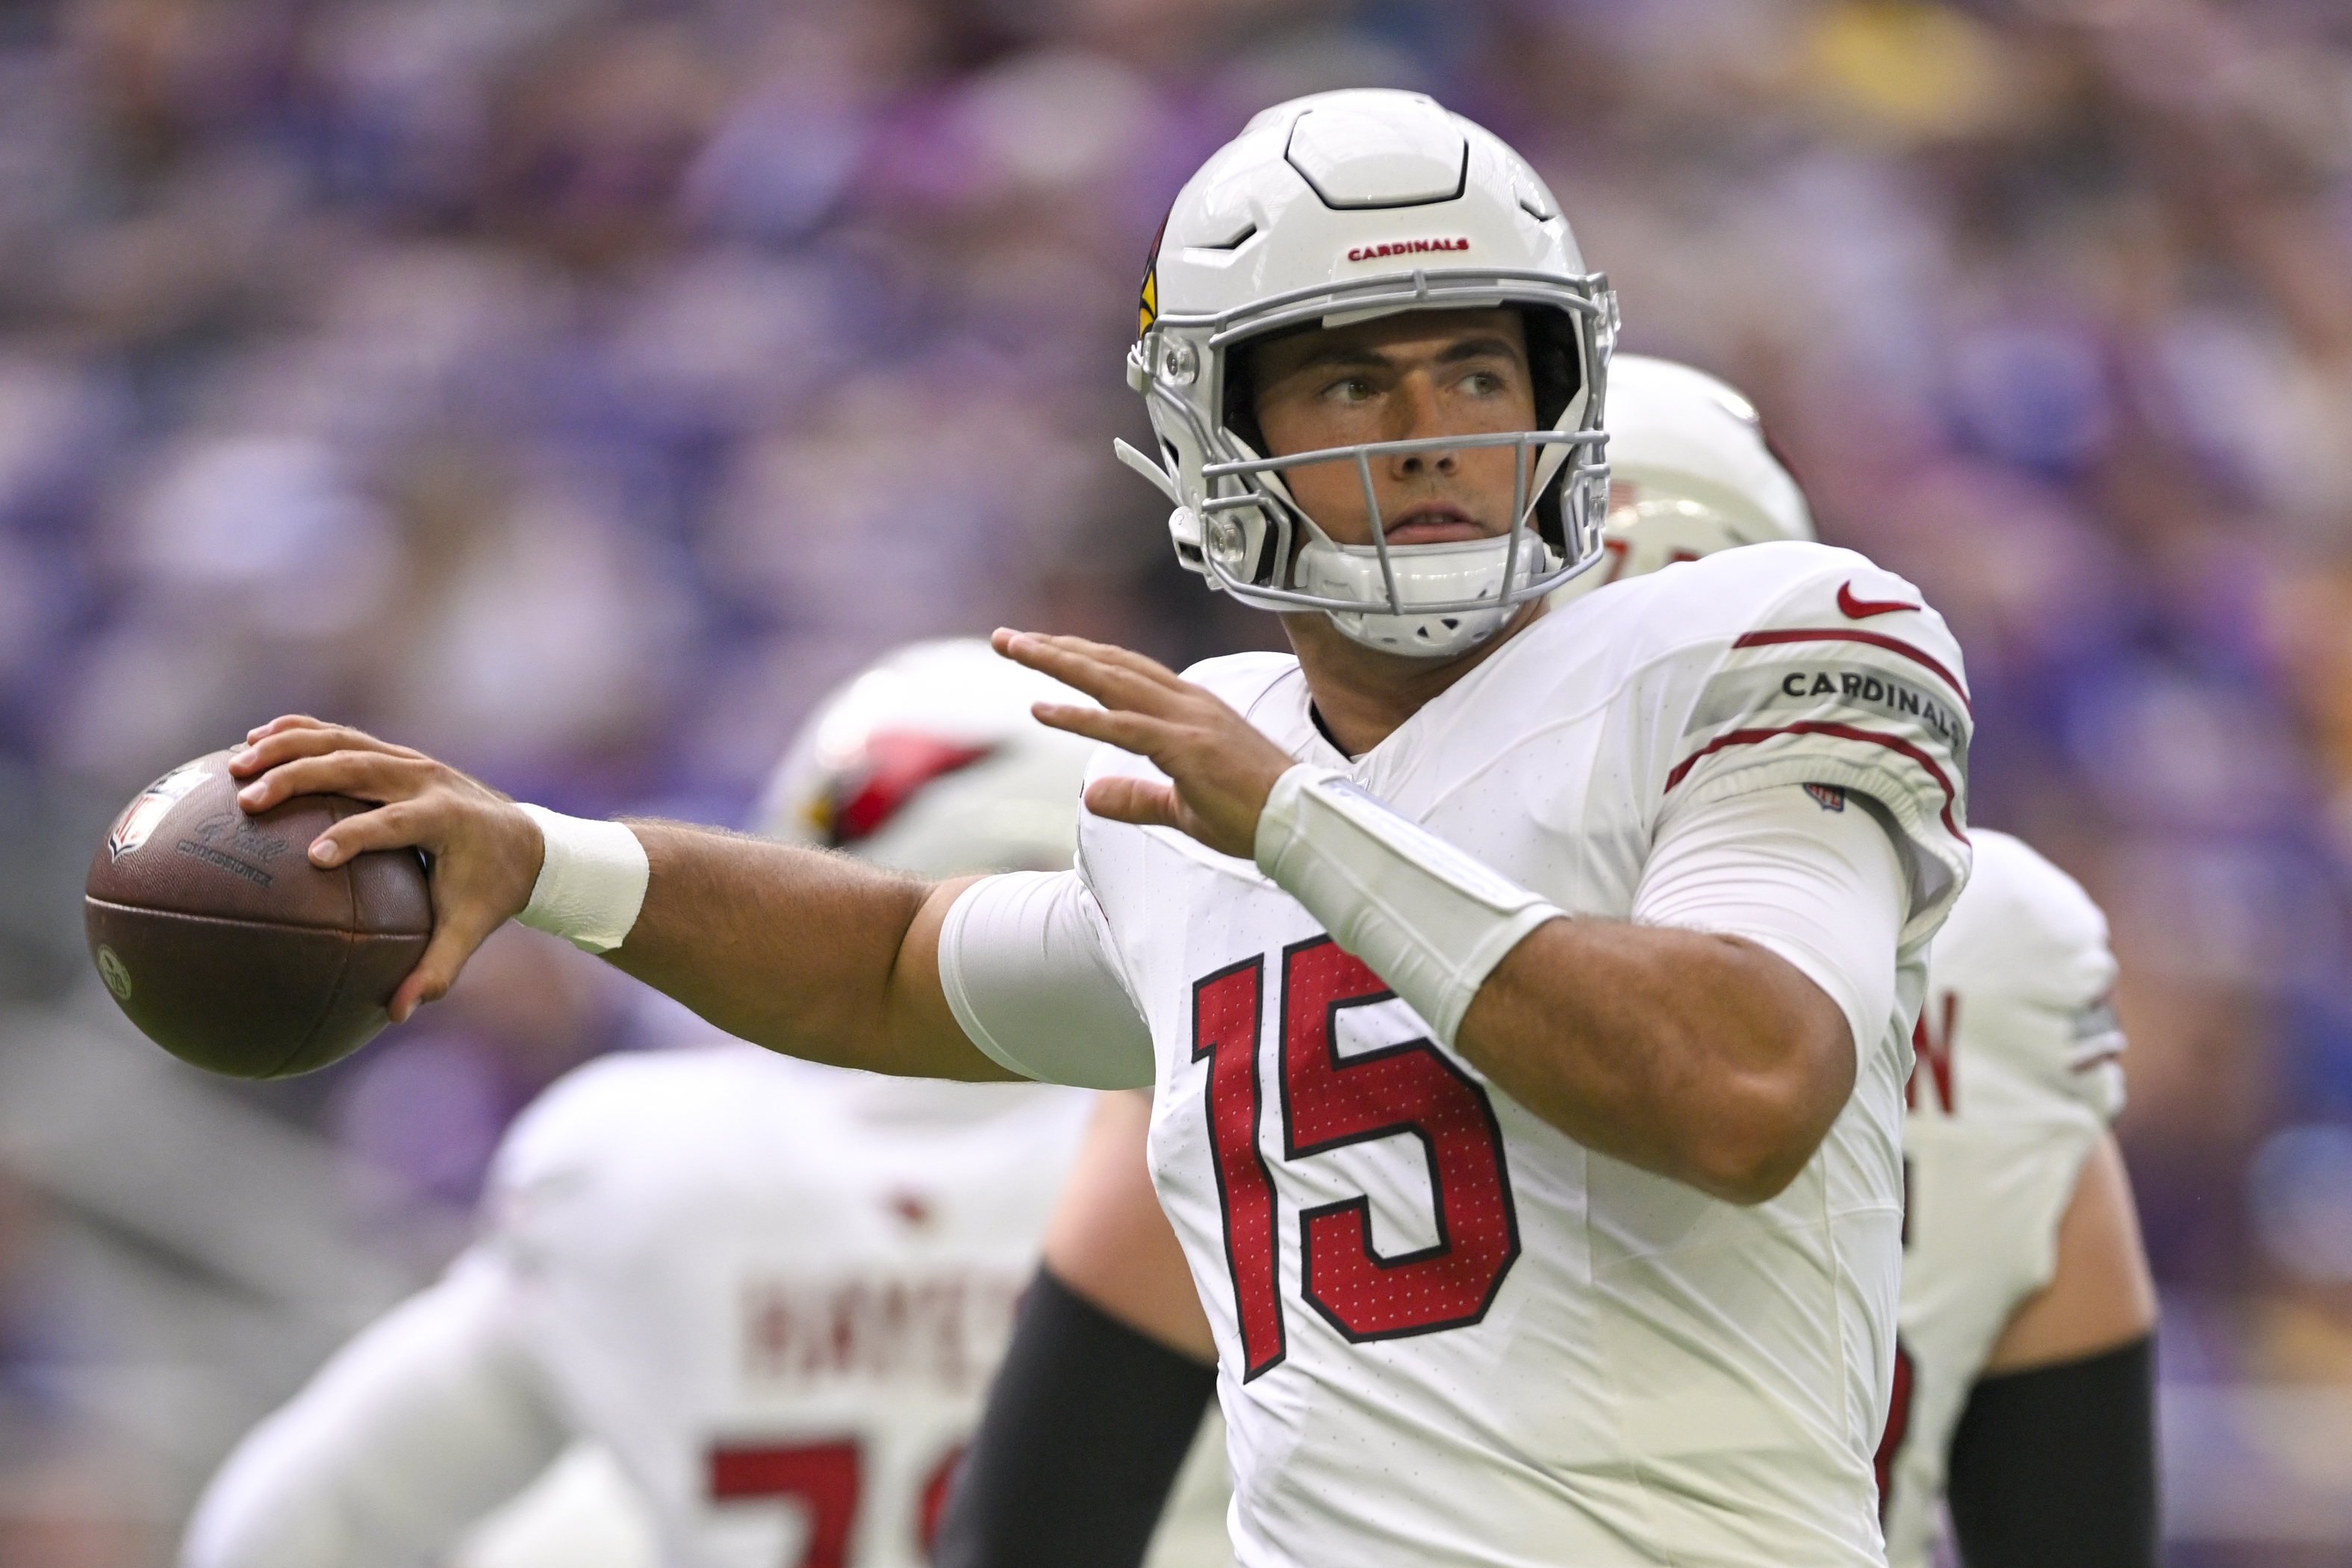 MINNEAPOLIS, MN - AUGUST 26: Arizona Cardinals Quarterback Clayton Tune (15) throws a pass to stay loose during a pre-season NFL game between the Minnesota Vikings and Arizona Cardinals on August 26, 2023, at U.S. Bank Stadium in Minneapolis, MN.